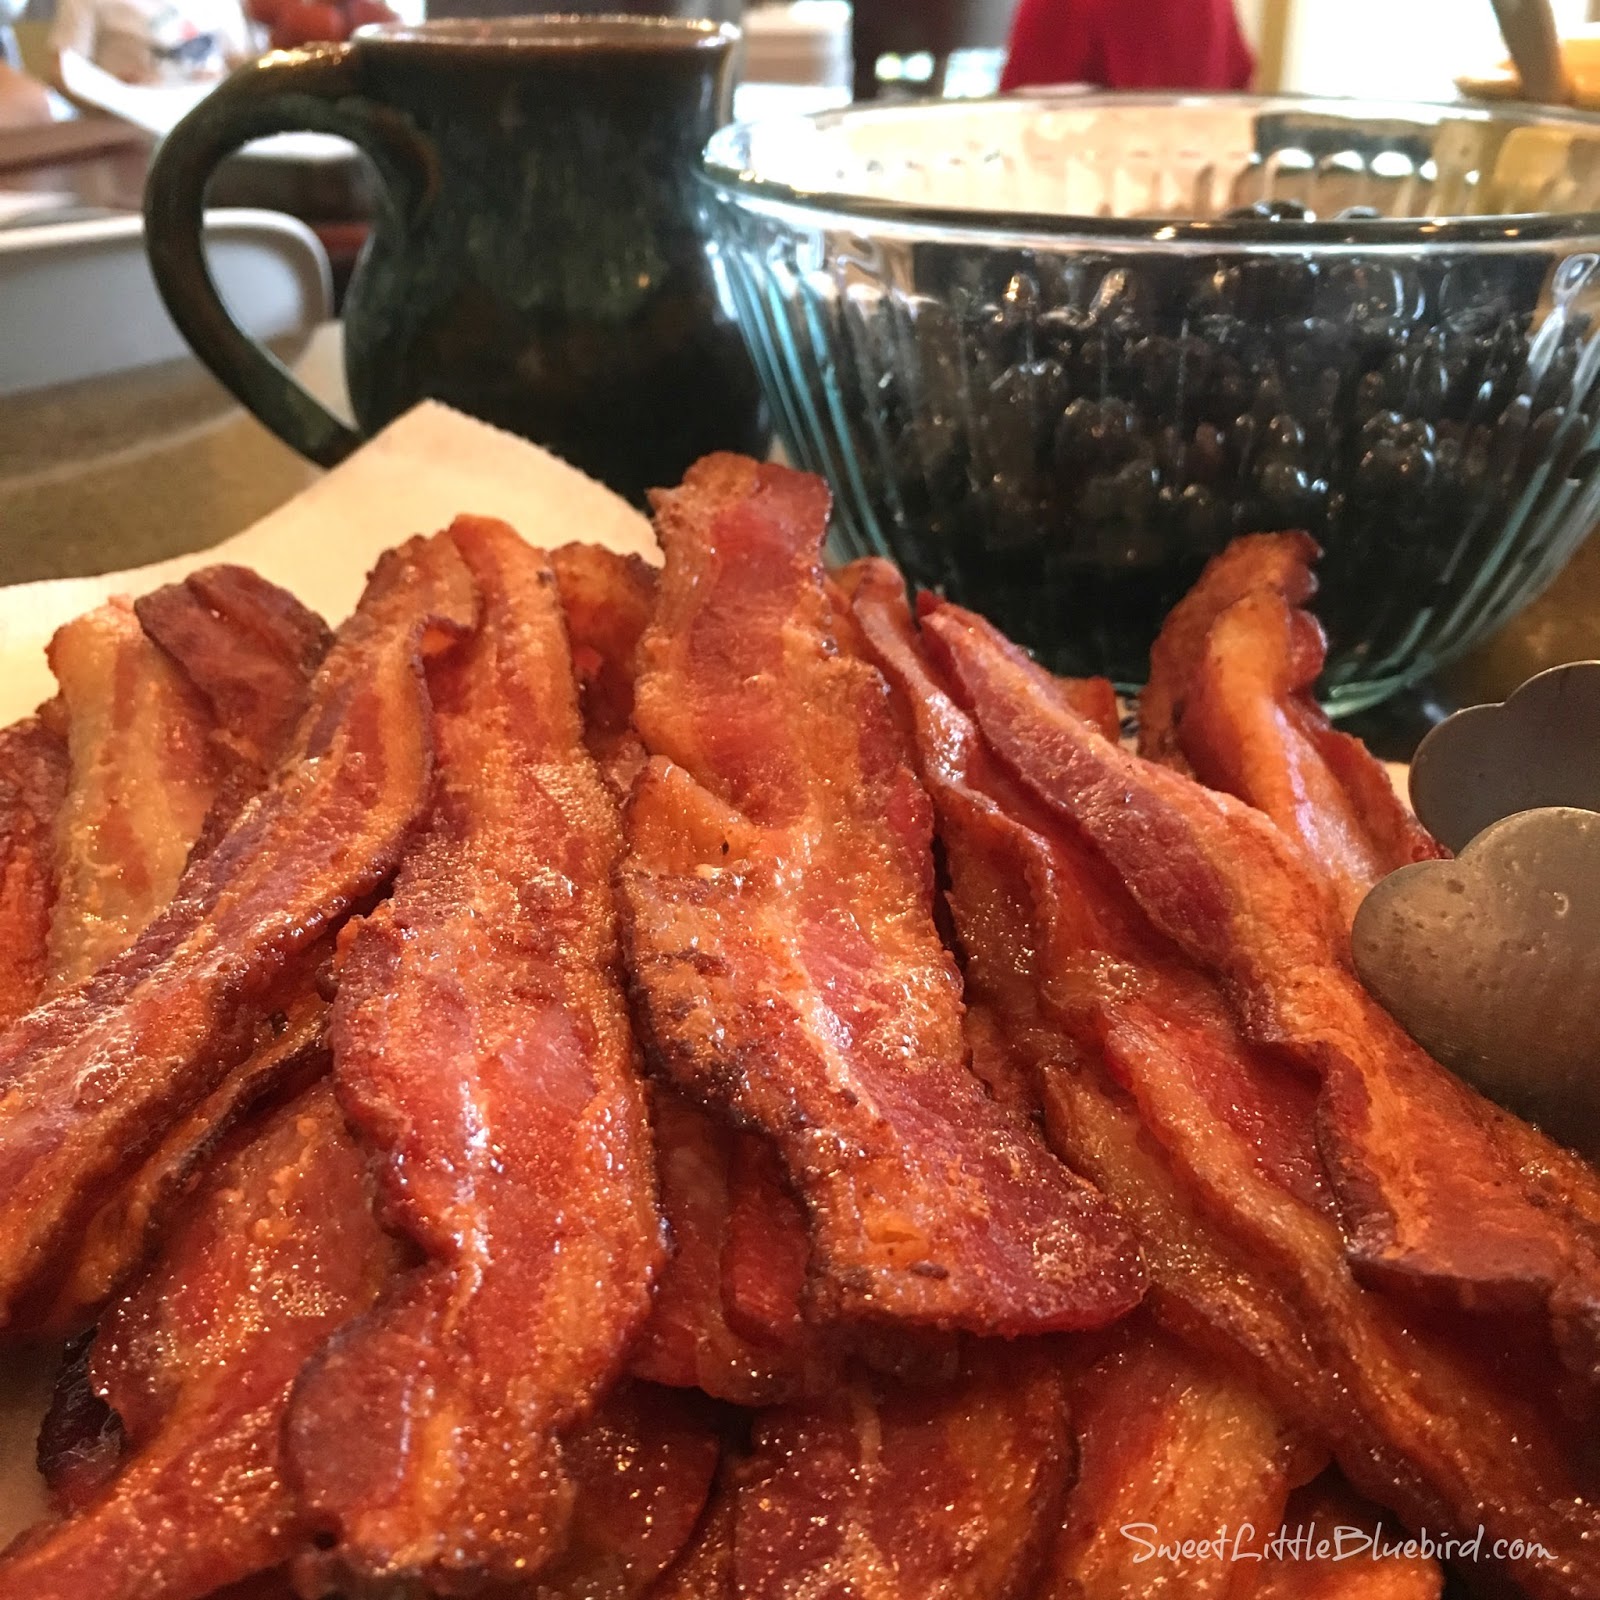 Oven Fried Bacon How To Make Perfect Bacon In The Oven Sweet Little Bluebird,50th Birthday Ideas